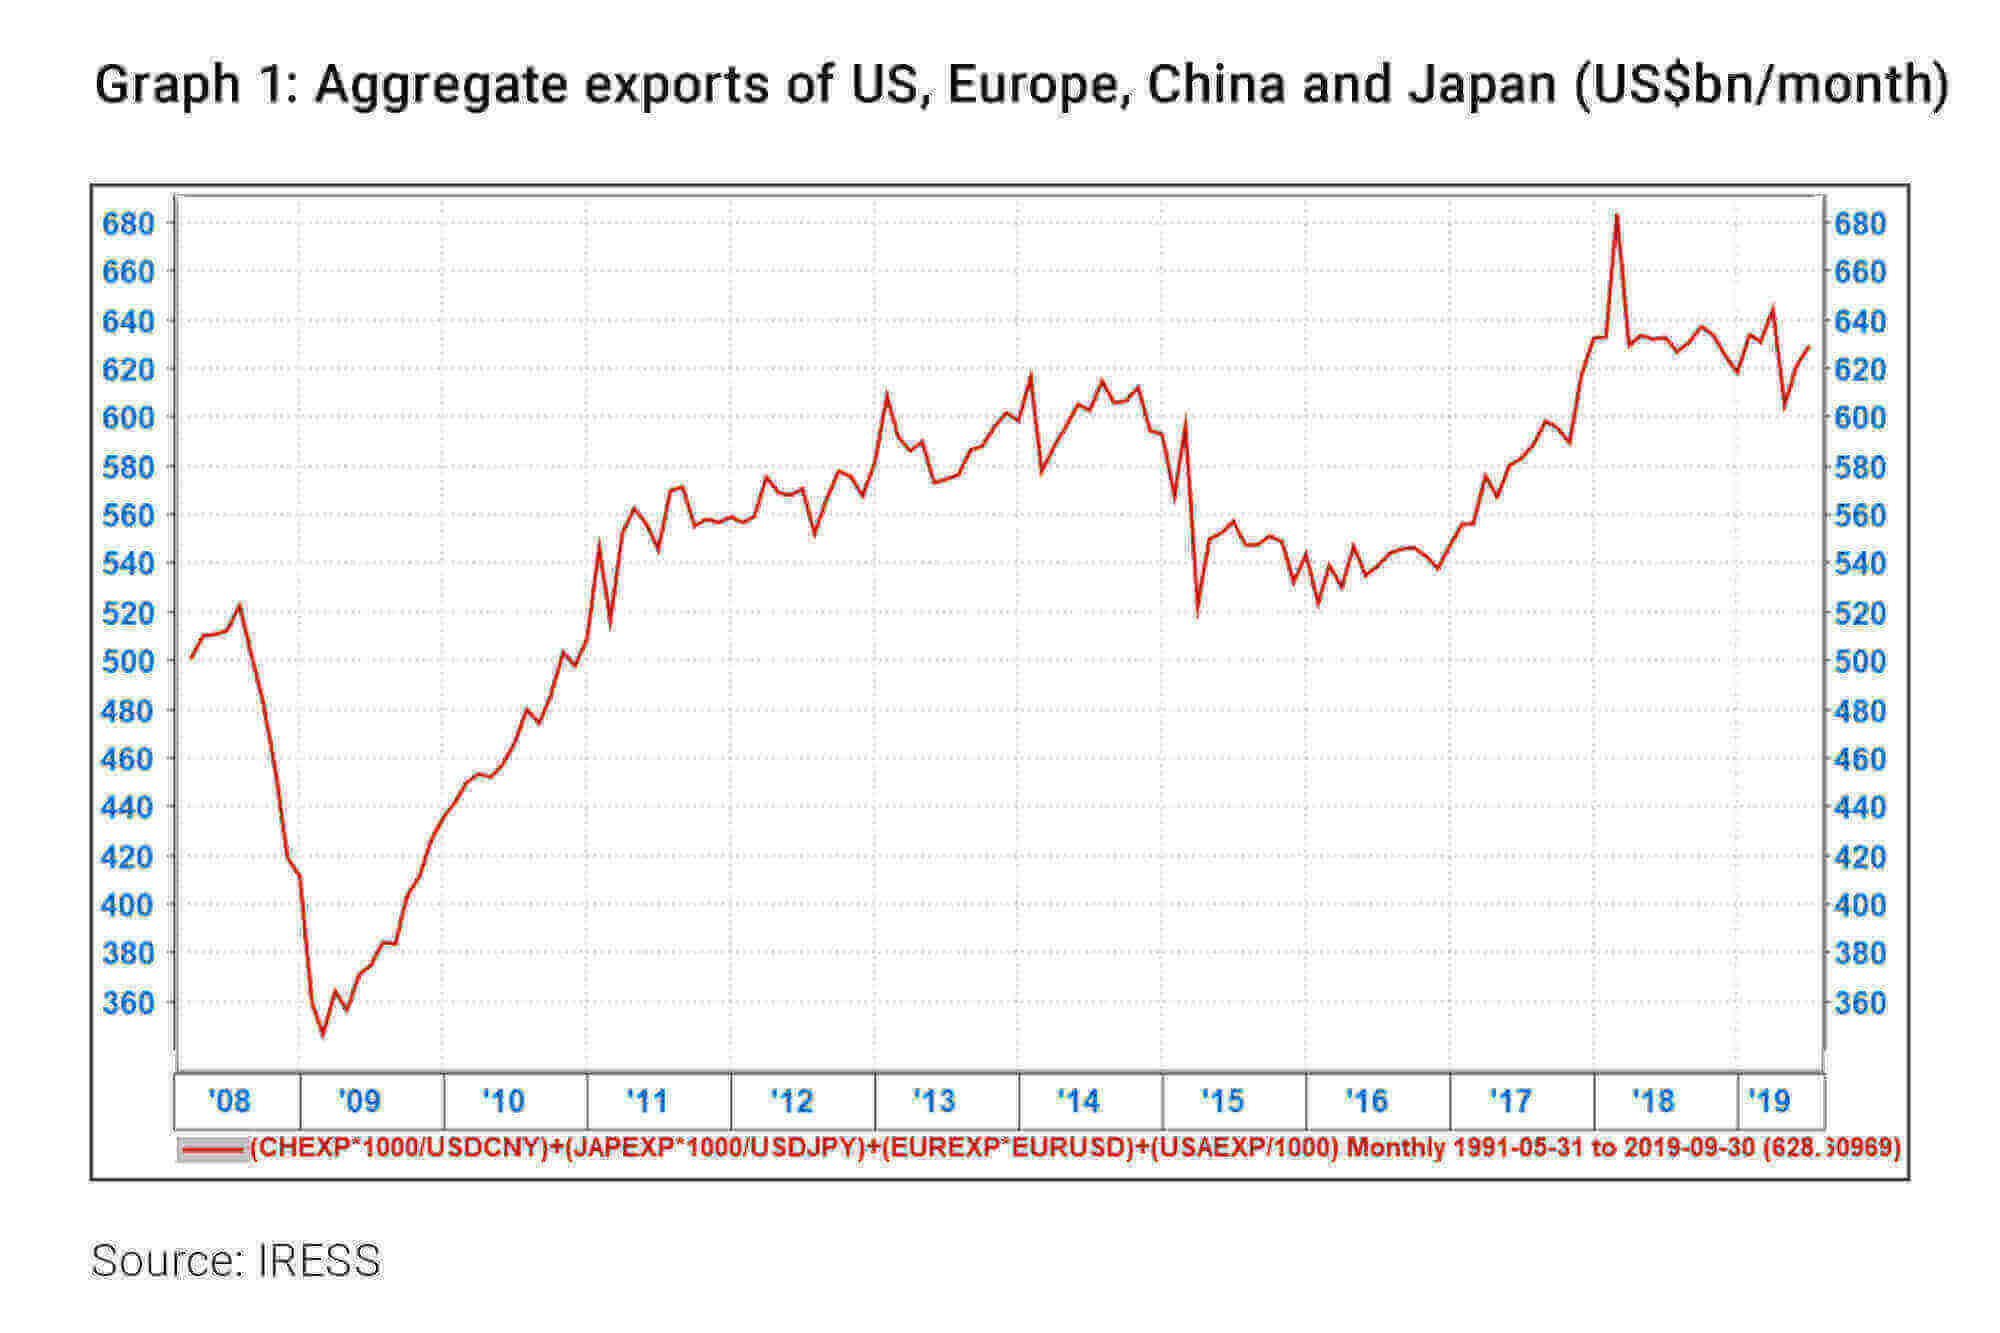 Aggregate exports of US, Europe, China and Japan (US$bn/month) - Allan Gray